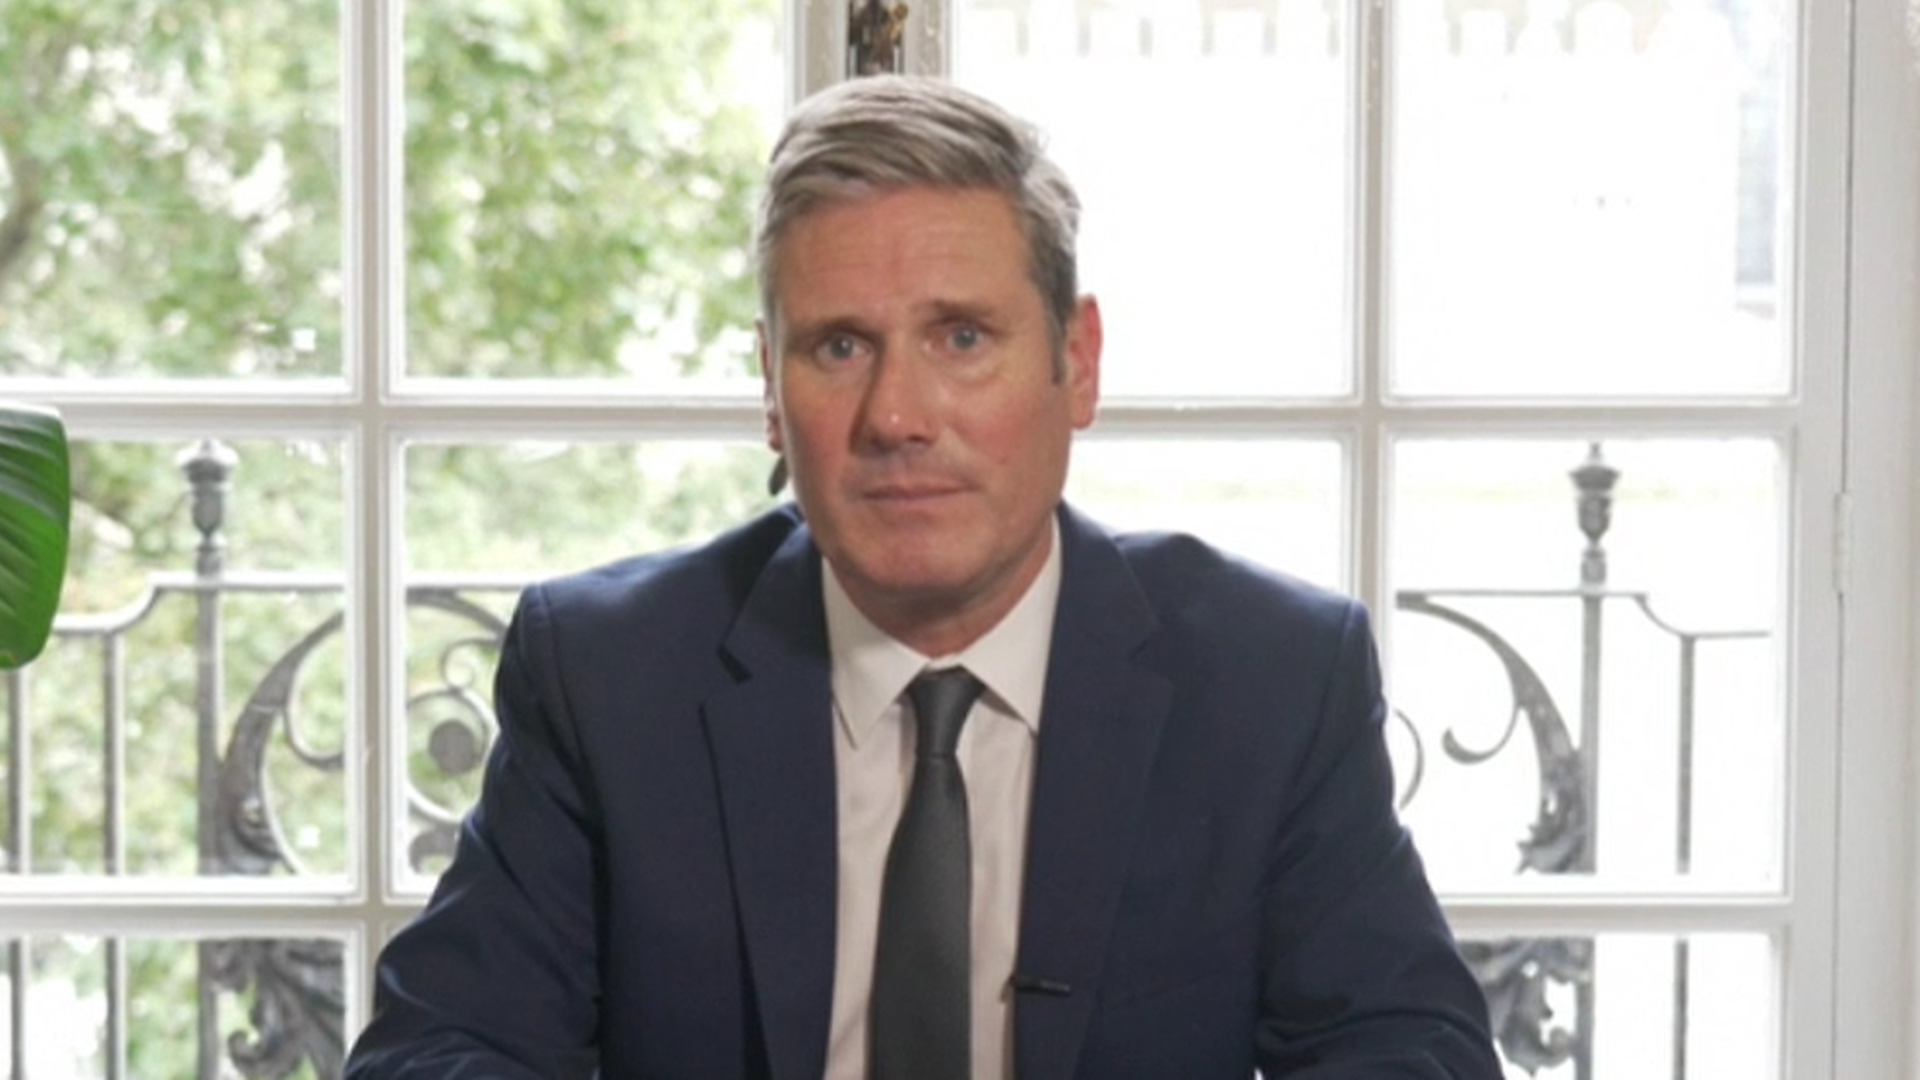 Keir Starmer addresses the nation in a televised address - Credit: BBC